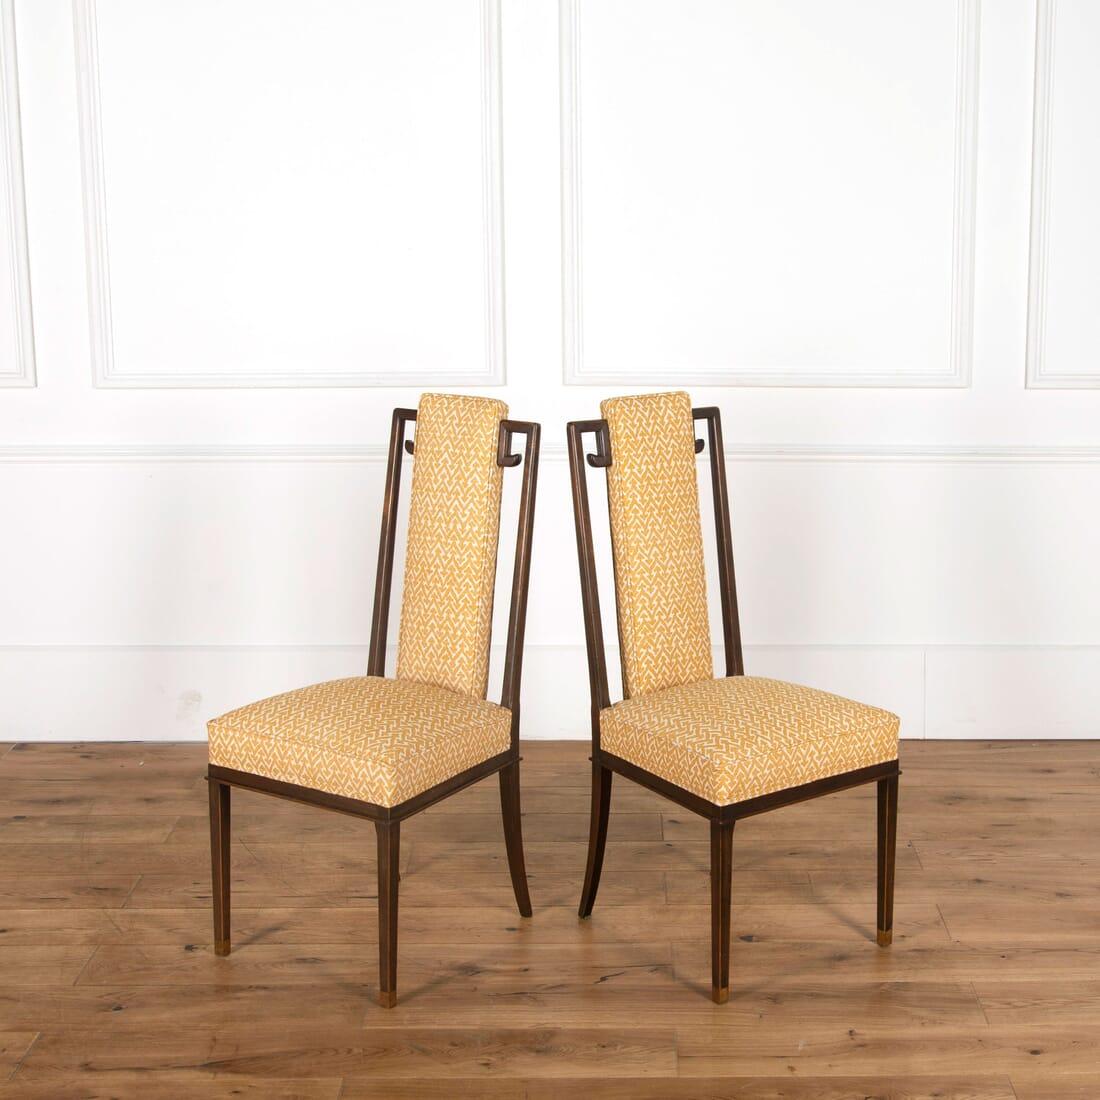 A stylish set of 12 French midcentury dining chairs in Chinese style with sabot feet – recovered in Fermoie linen.